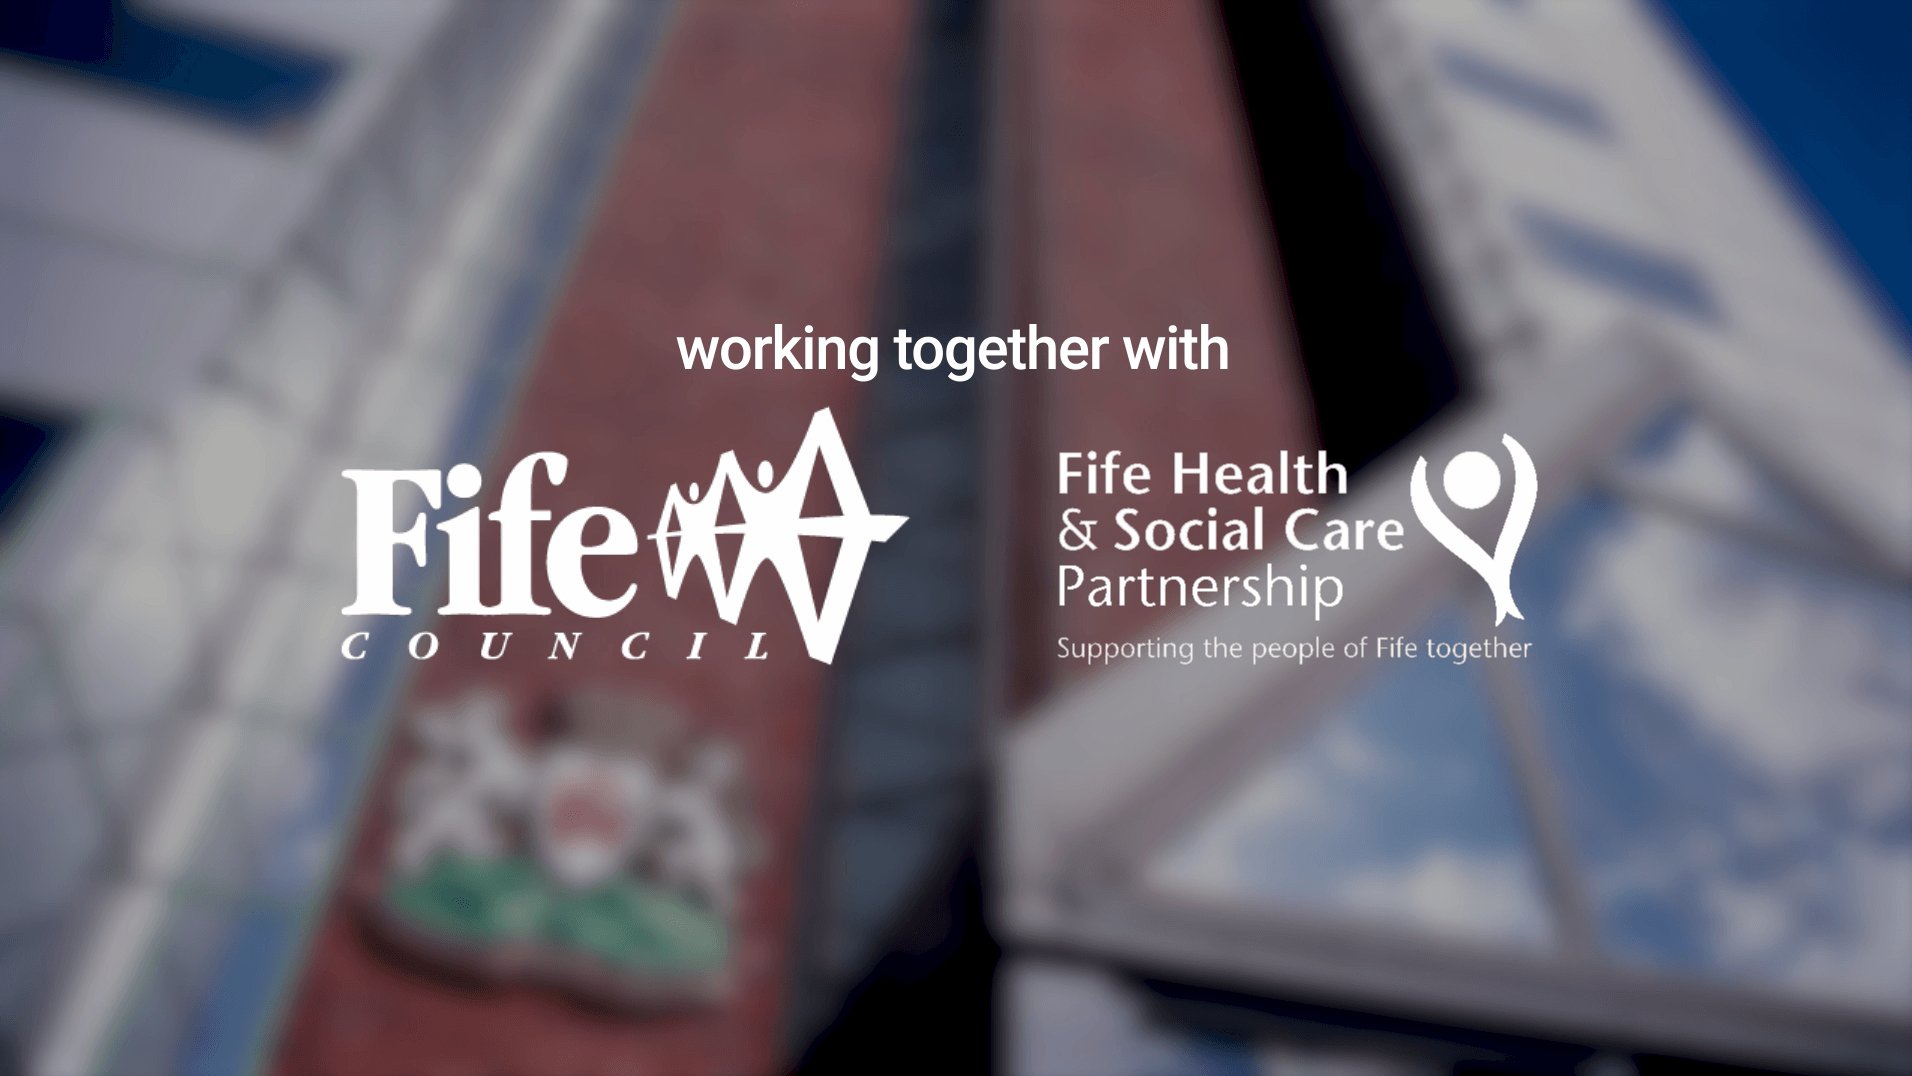 Fife Health and Social Care Partnership Increases Capacity by 30% Through Mobile Working Solutions